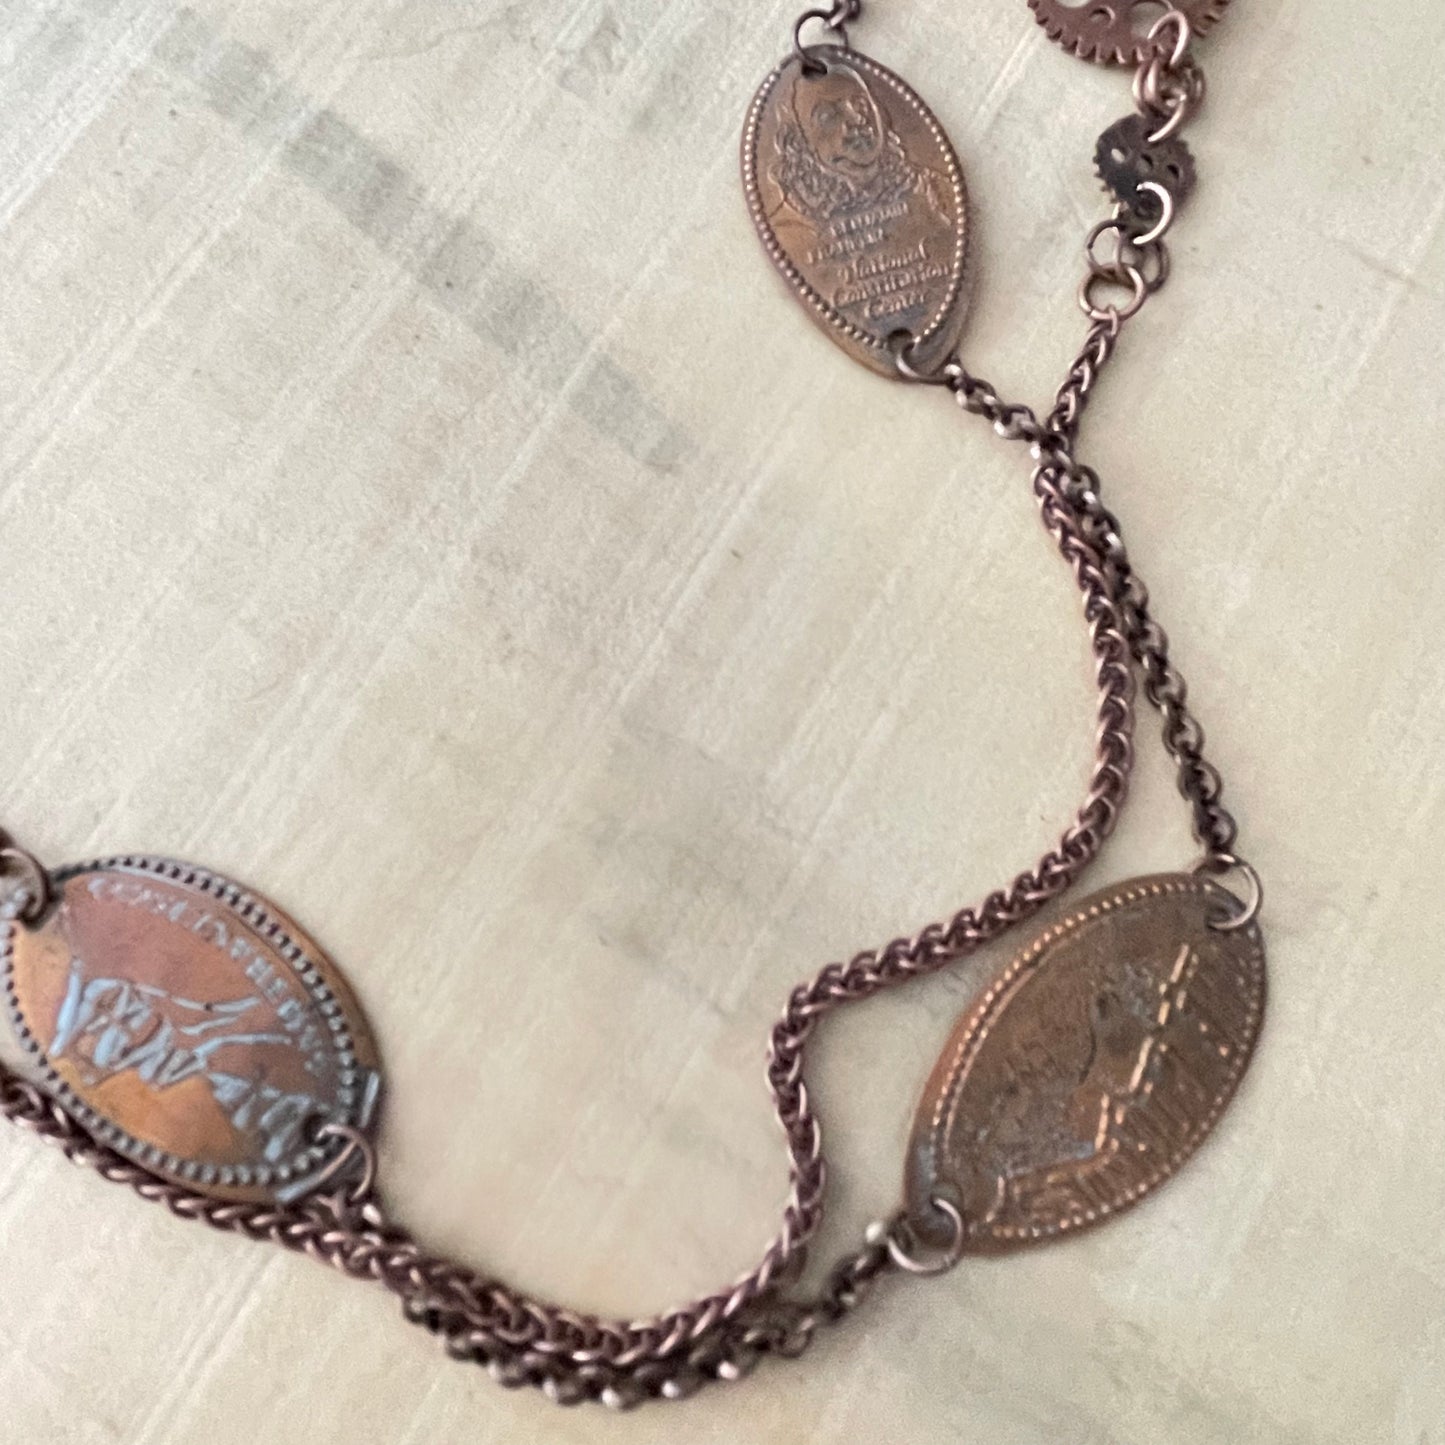 Long Flattened Penny Gear & Copper Chain Statement Necklace 28" Layered Upcycled Steampunk